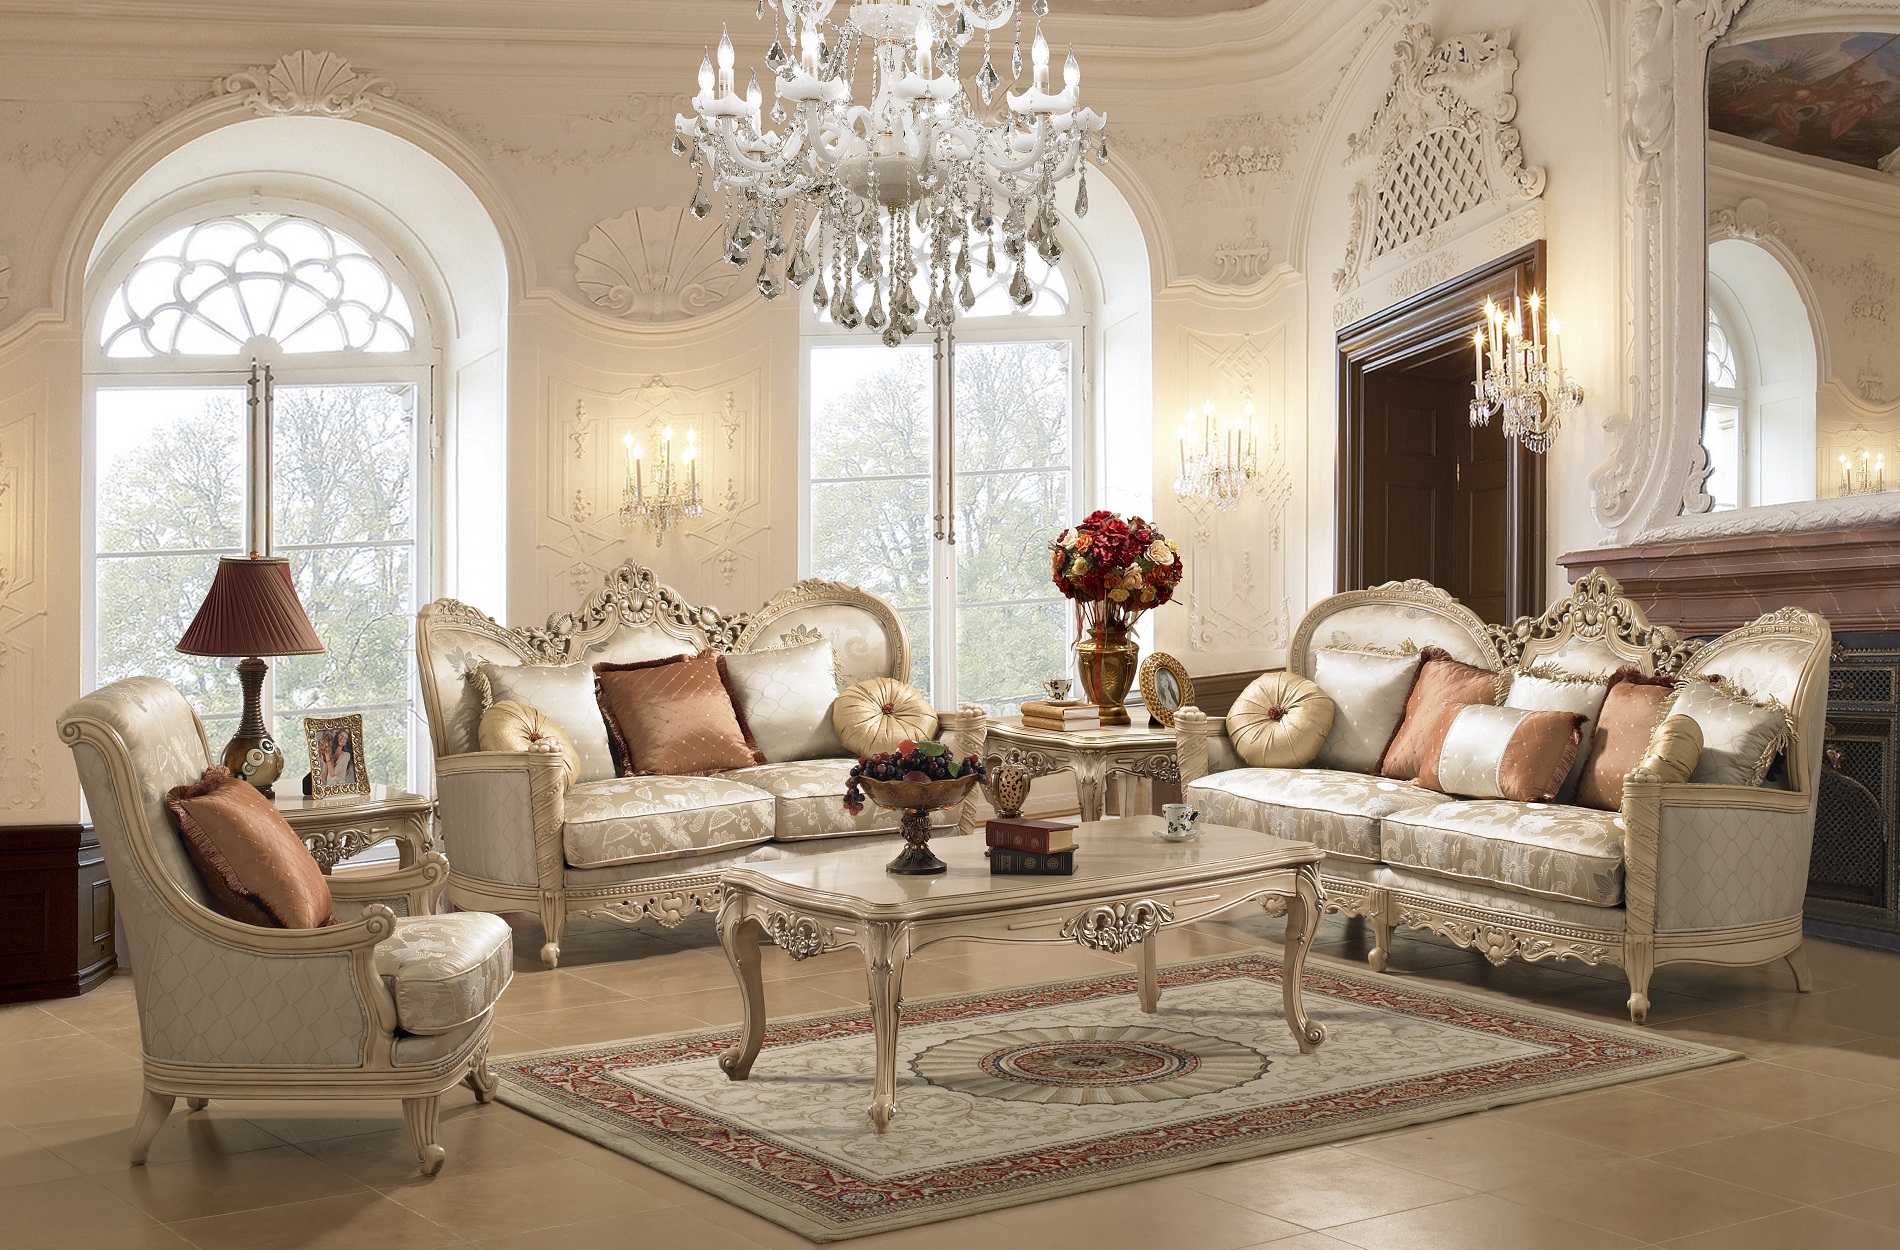 Formal Living Room: Adding Elegance To Your Home